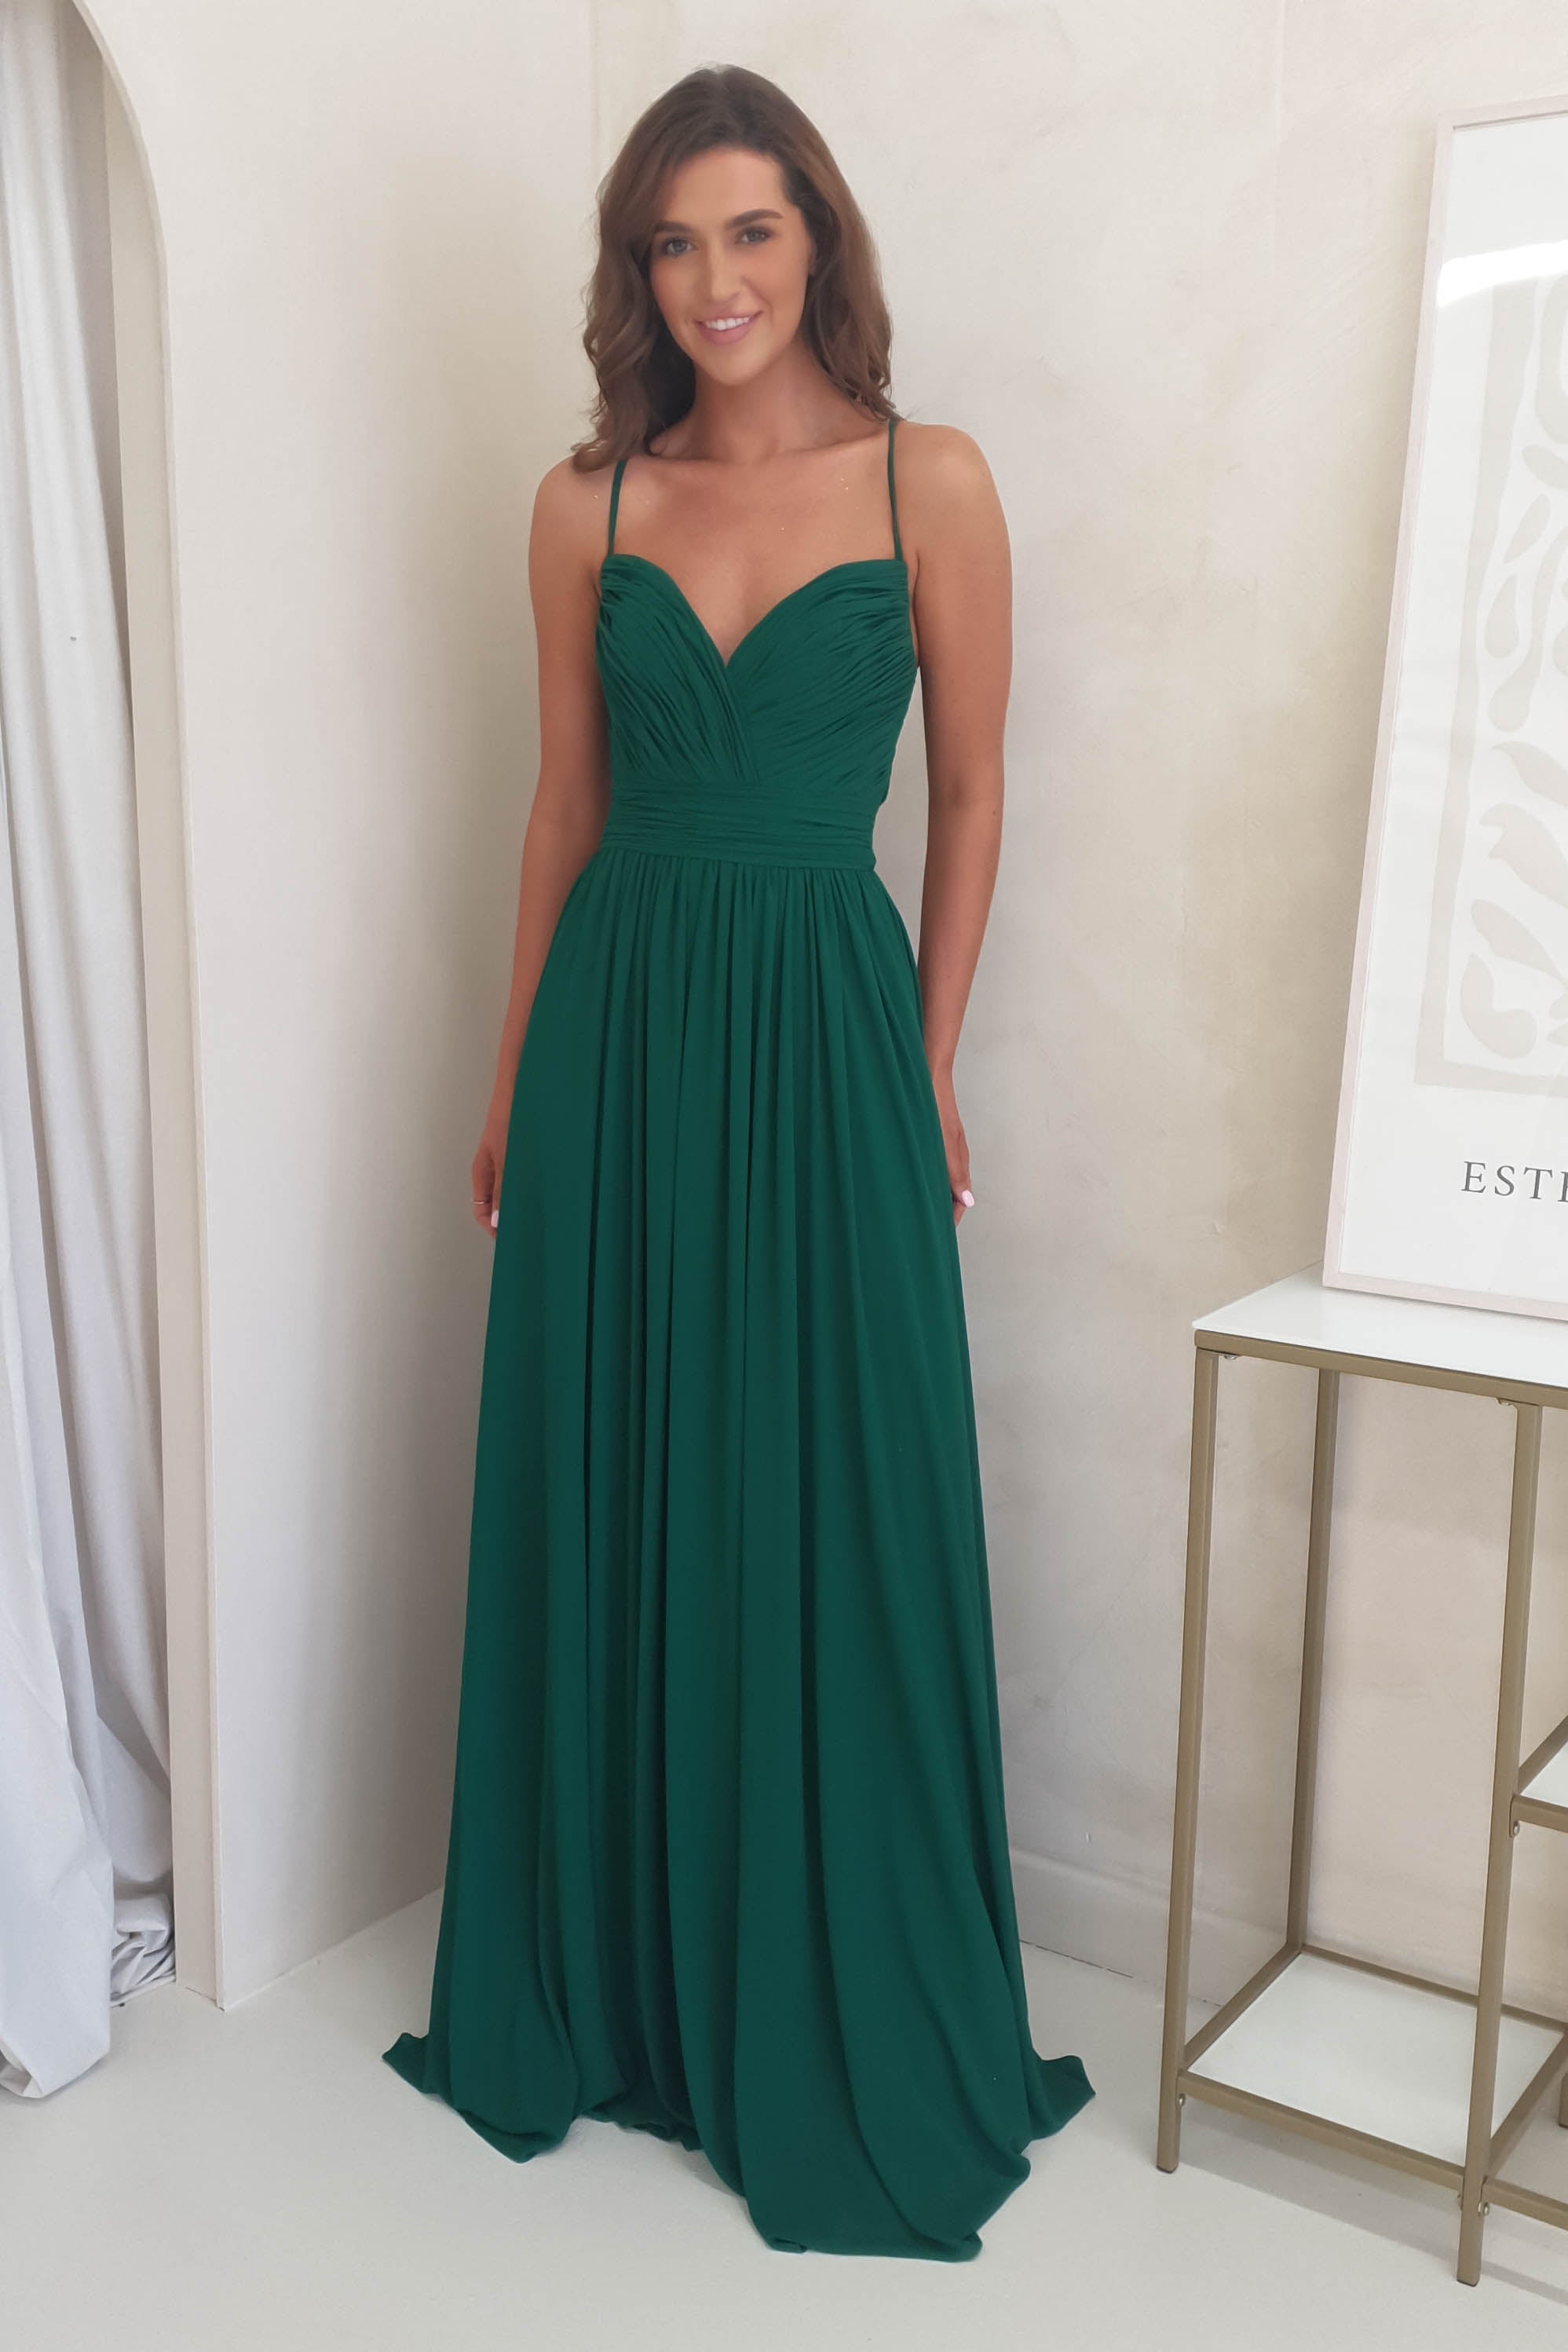 done-f8001-emerald-gown-with-clip-up-back-emerald-green-pink-bloom-bethy-soft-chiffon-maxi-green-bridesmaid-prom-dress-dress-50421855813973.jpg